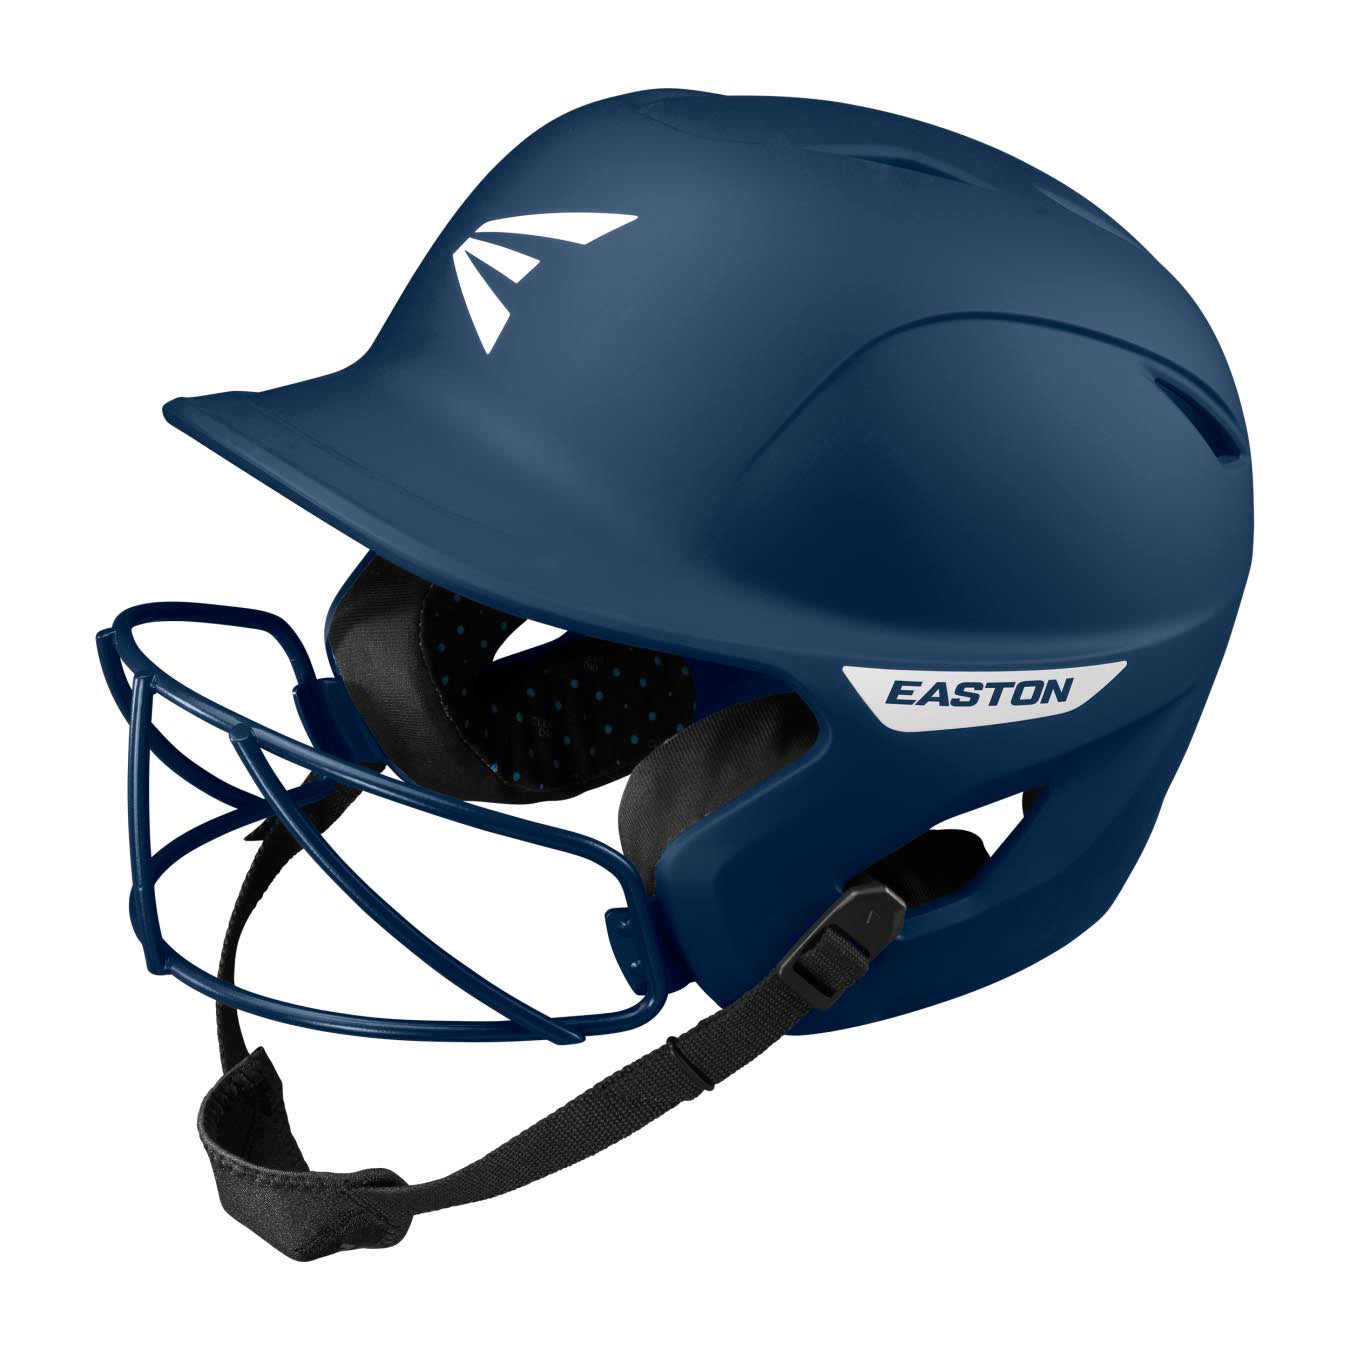 Easton Ghost Fastpitch Batting Helmet w/Cage Large/X-Large